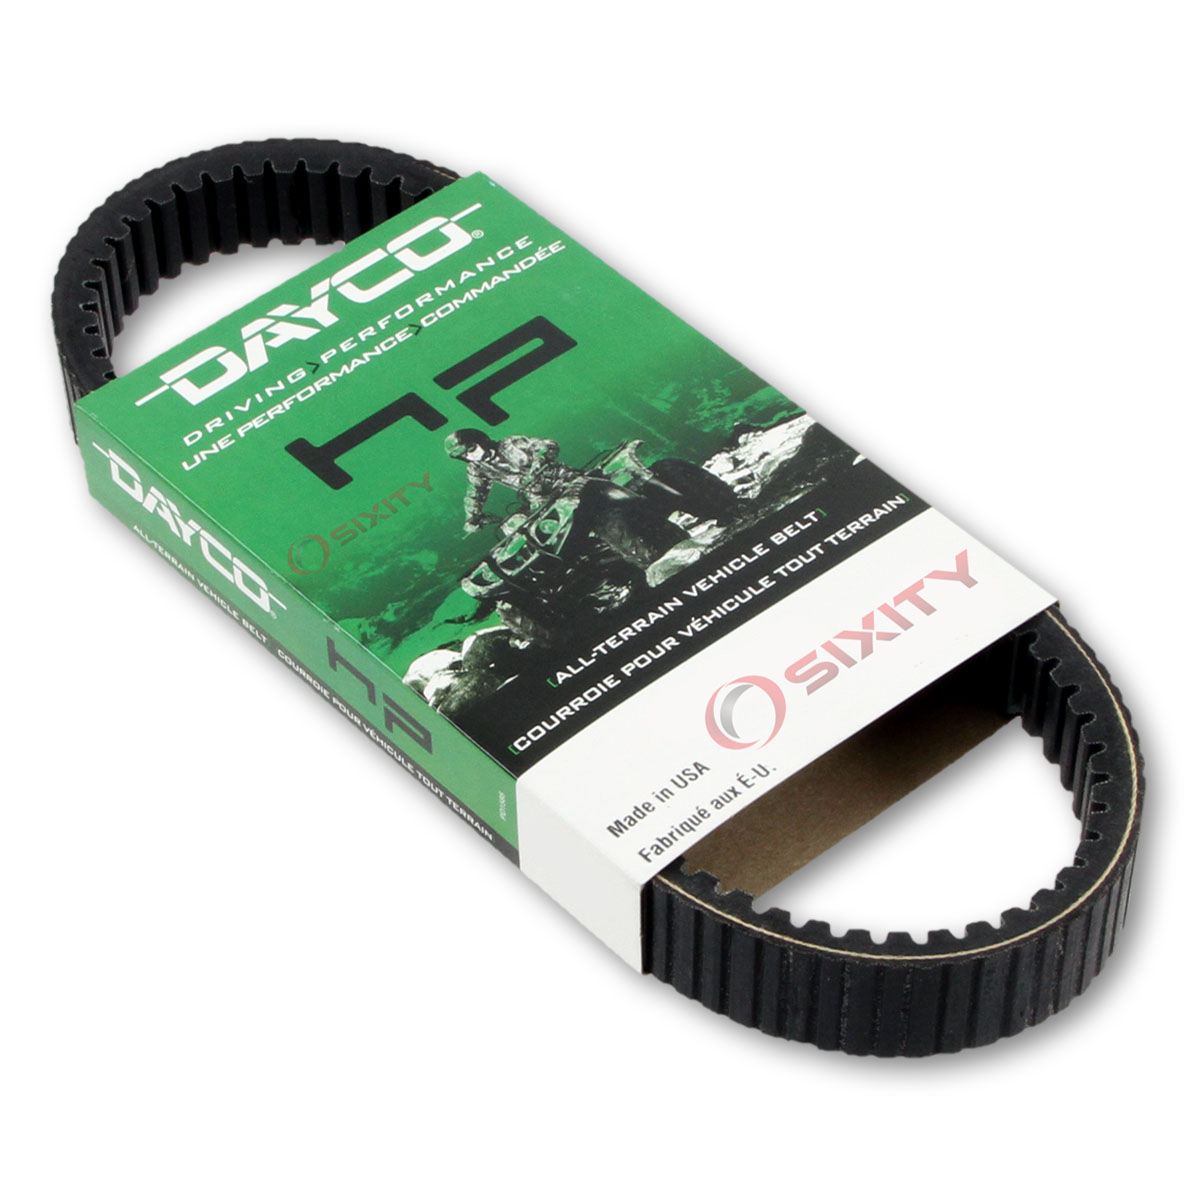 Dayco HP Drive Belt for 2000-2009 Arctic Cat 500 4x4 Auto - High Performance